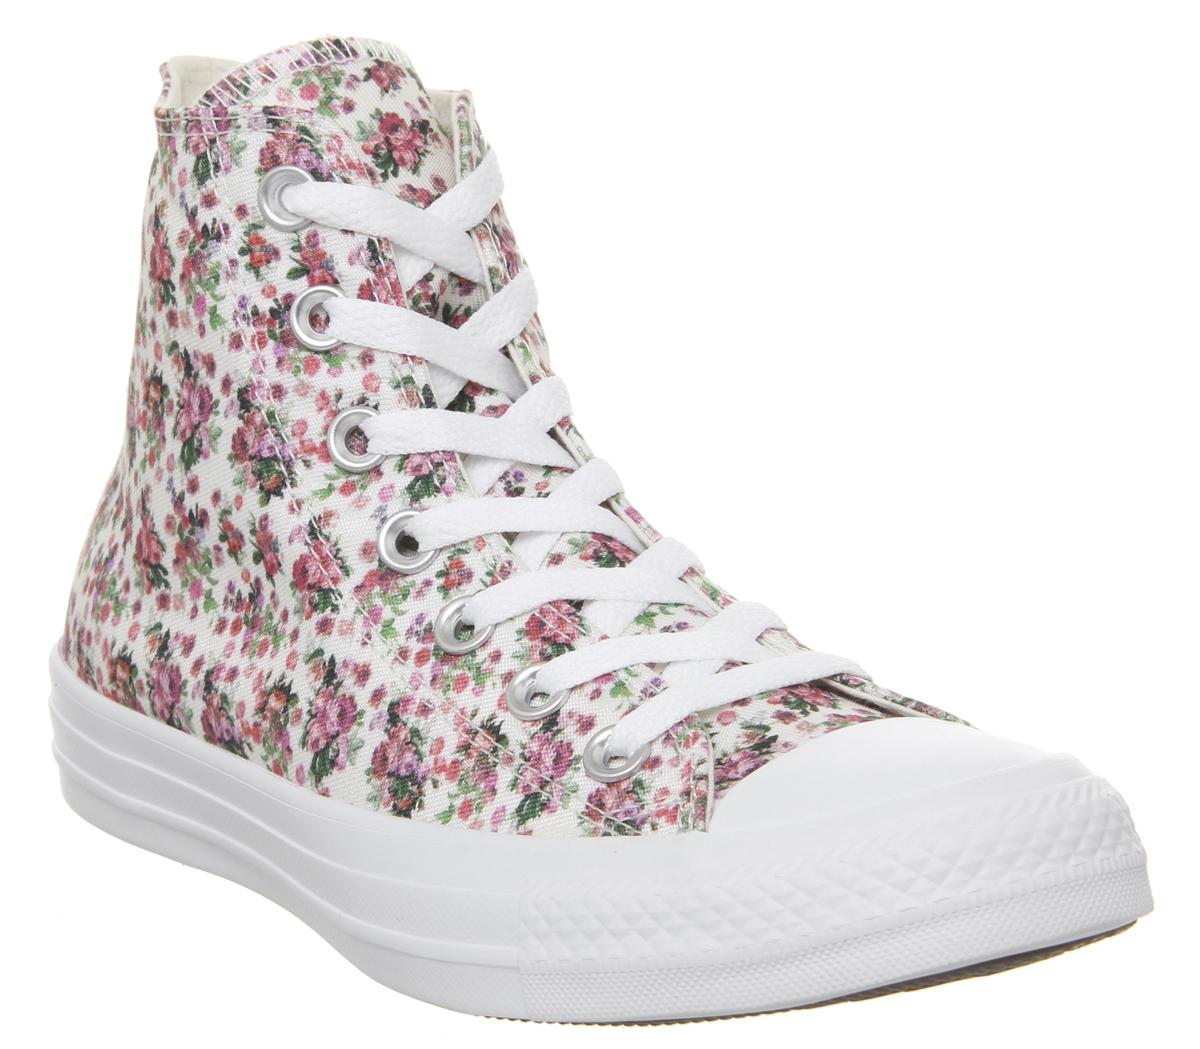 Converse Converse All Star Hi Trainers Pink Foam Egret White Floral - Hers  trainers